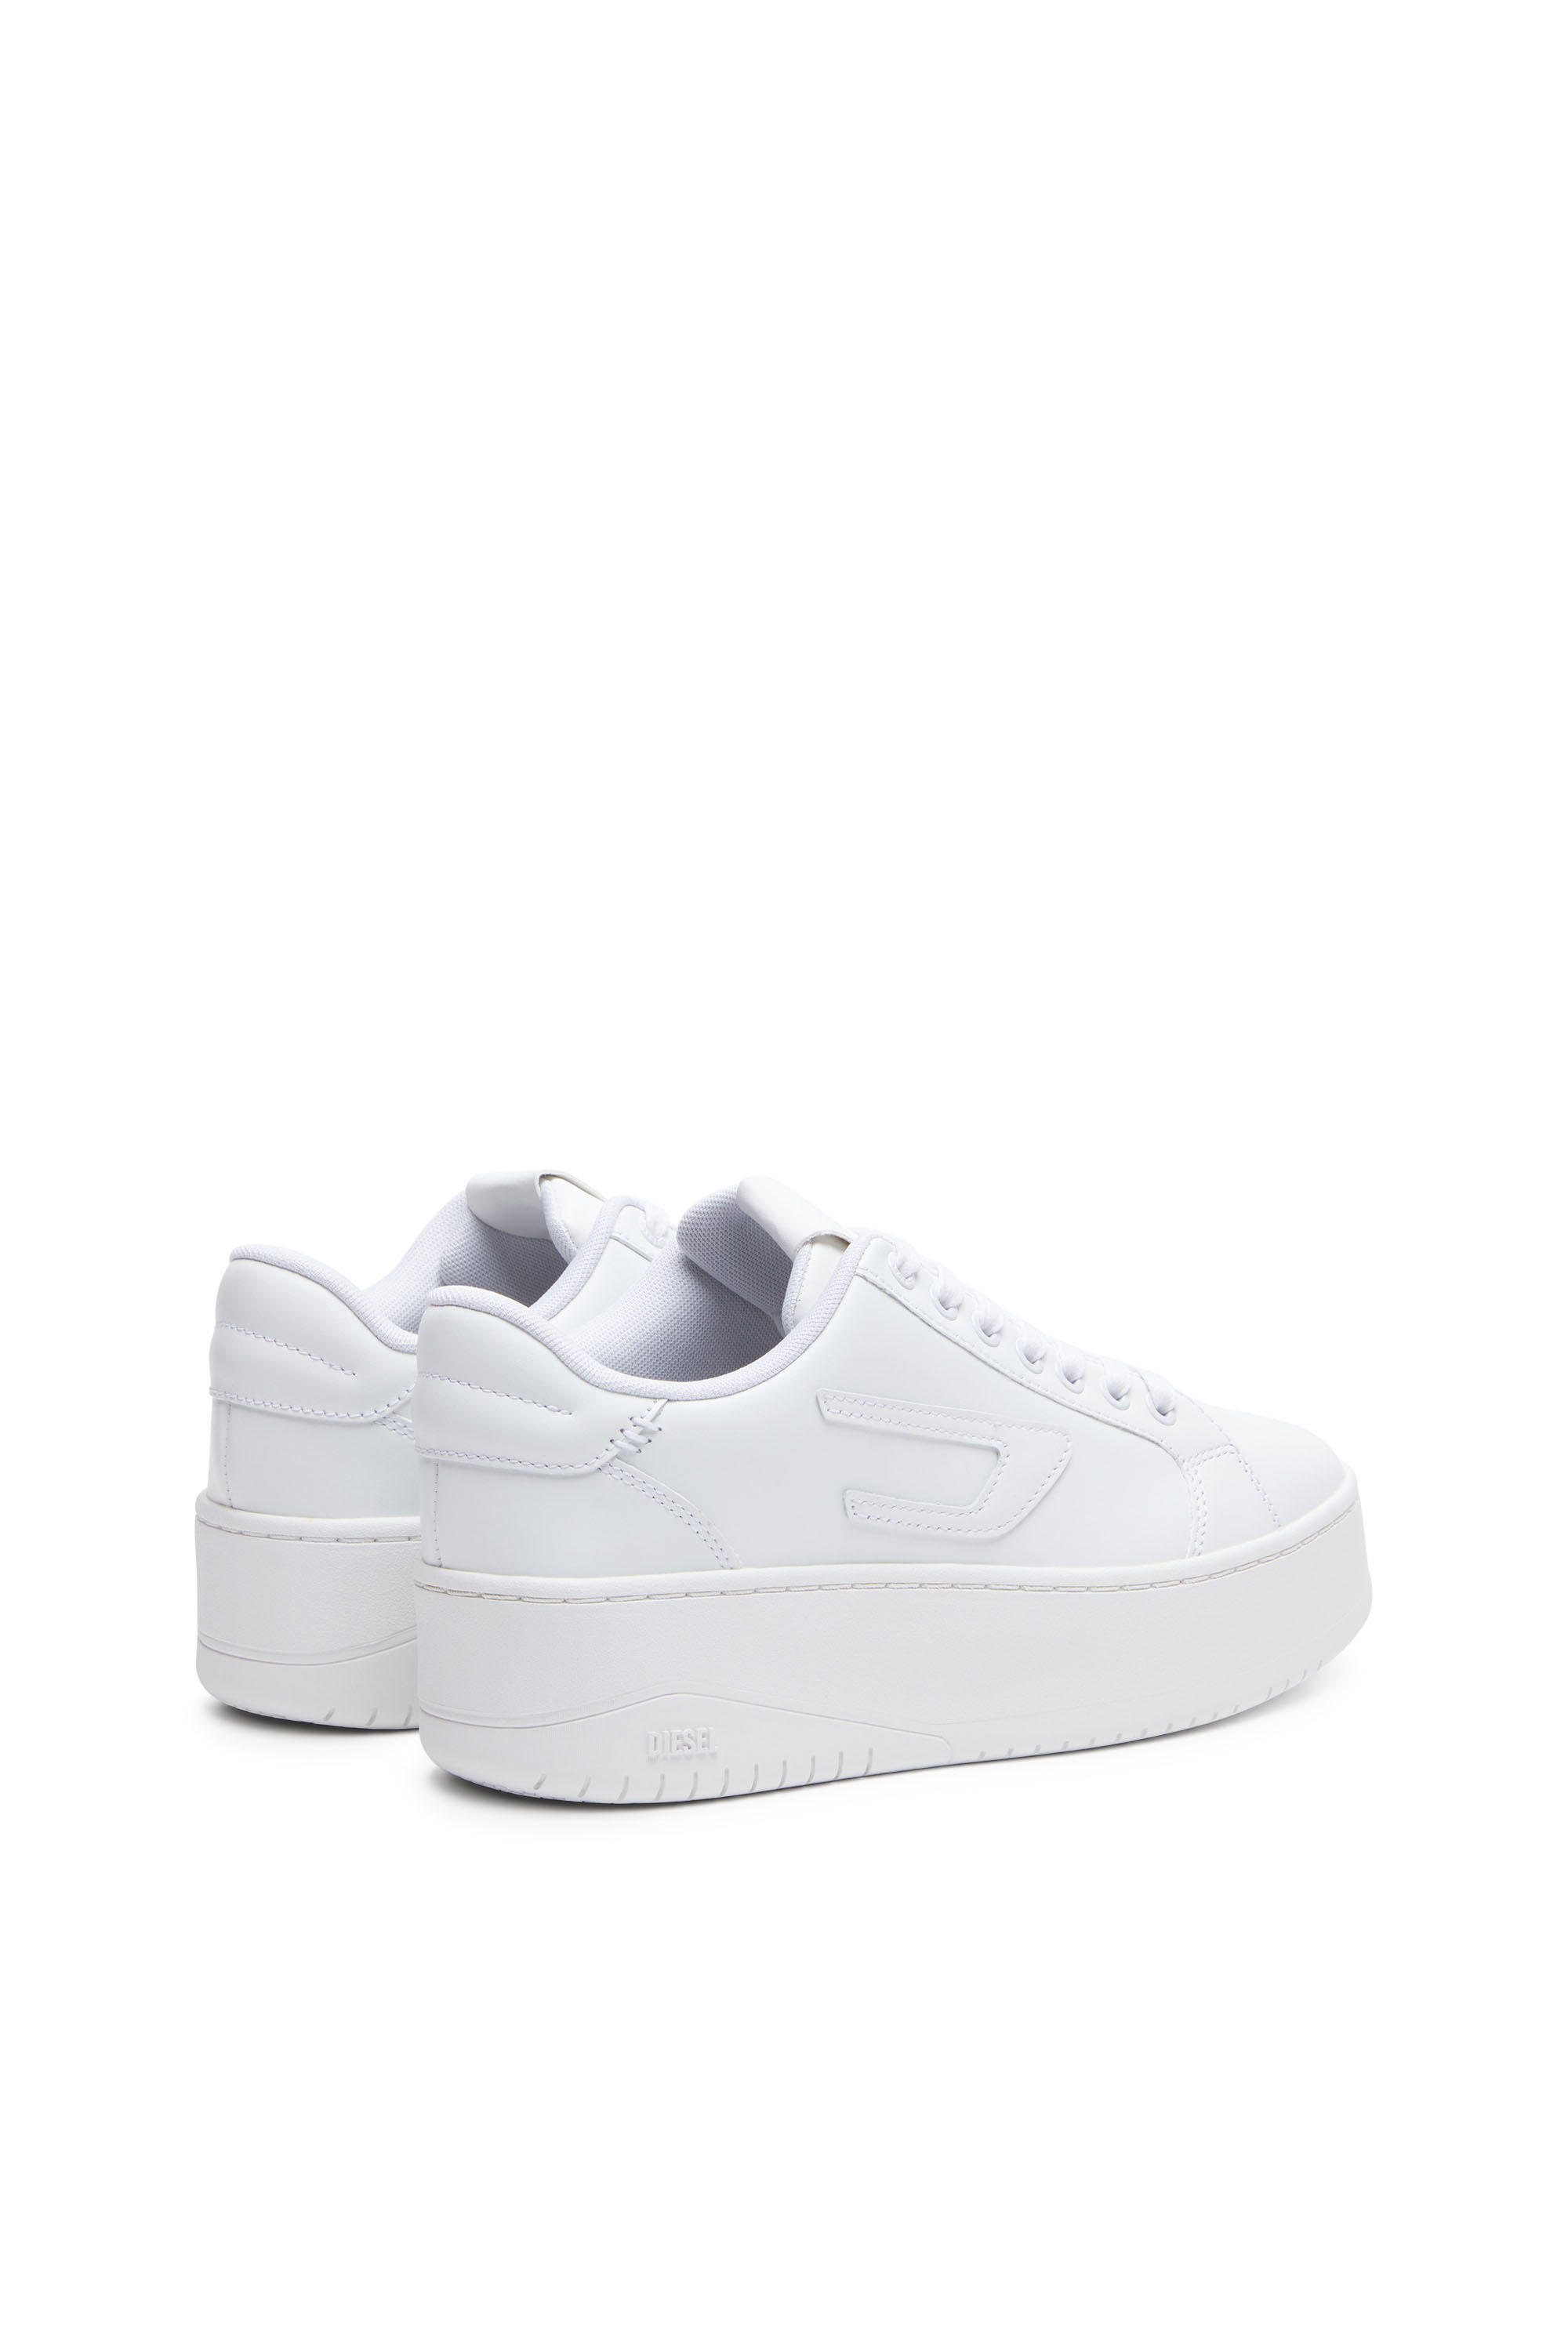 Diesel - S-ATHENE BOLD X, Woman S-Athene Bold-Flatform sneakers in leather in White - Image 3